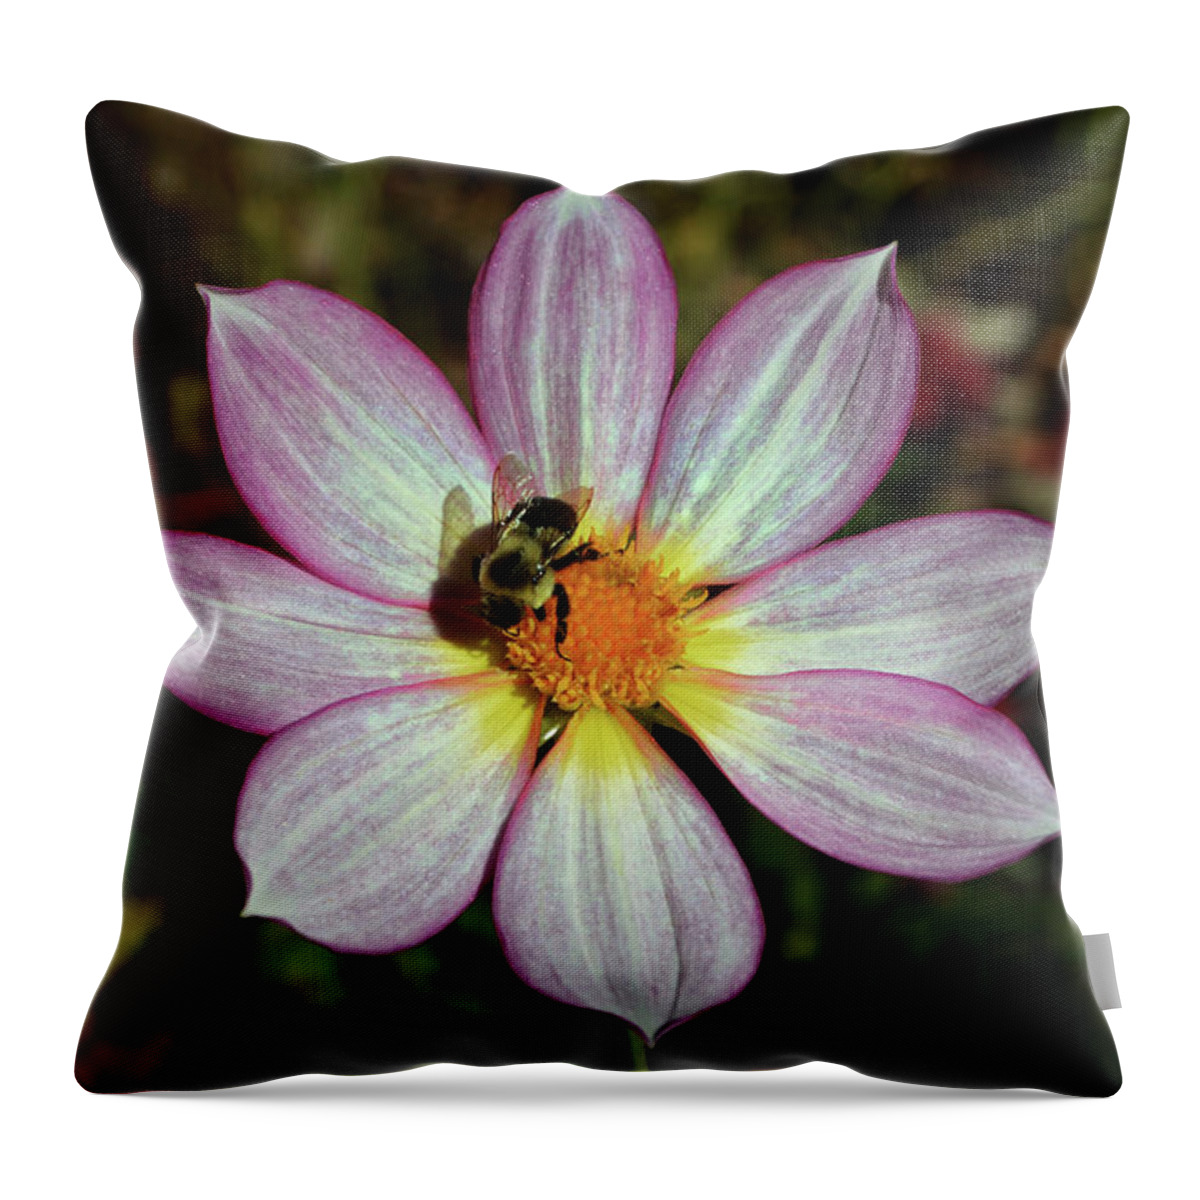 Flower Throw Pillow featuring the photograph Dahlia And A Bumblebee 009 by George Bostian